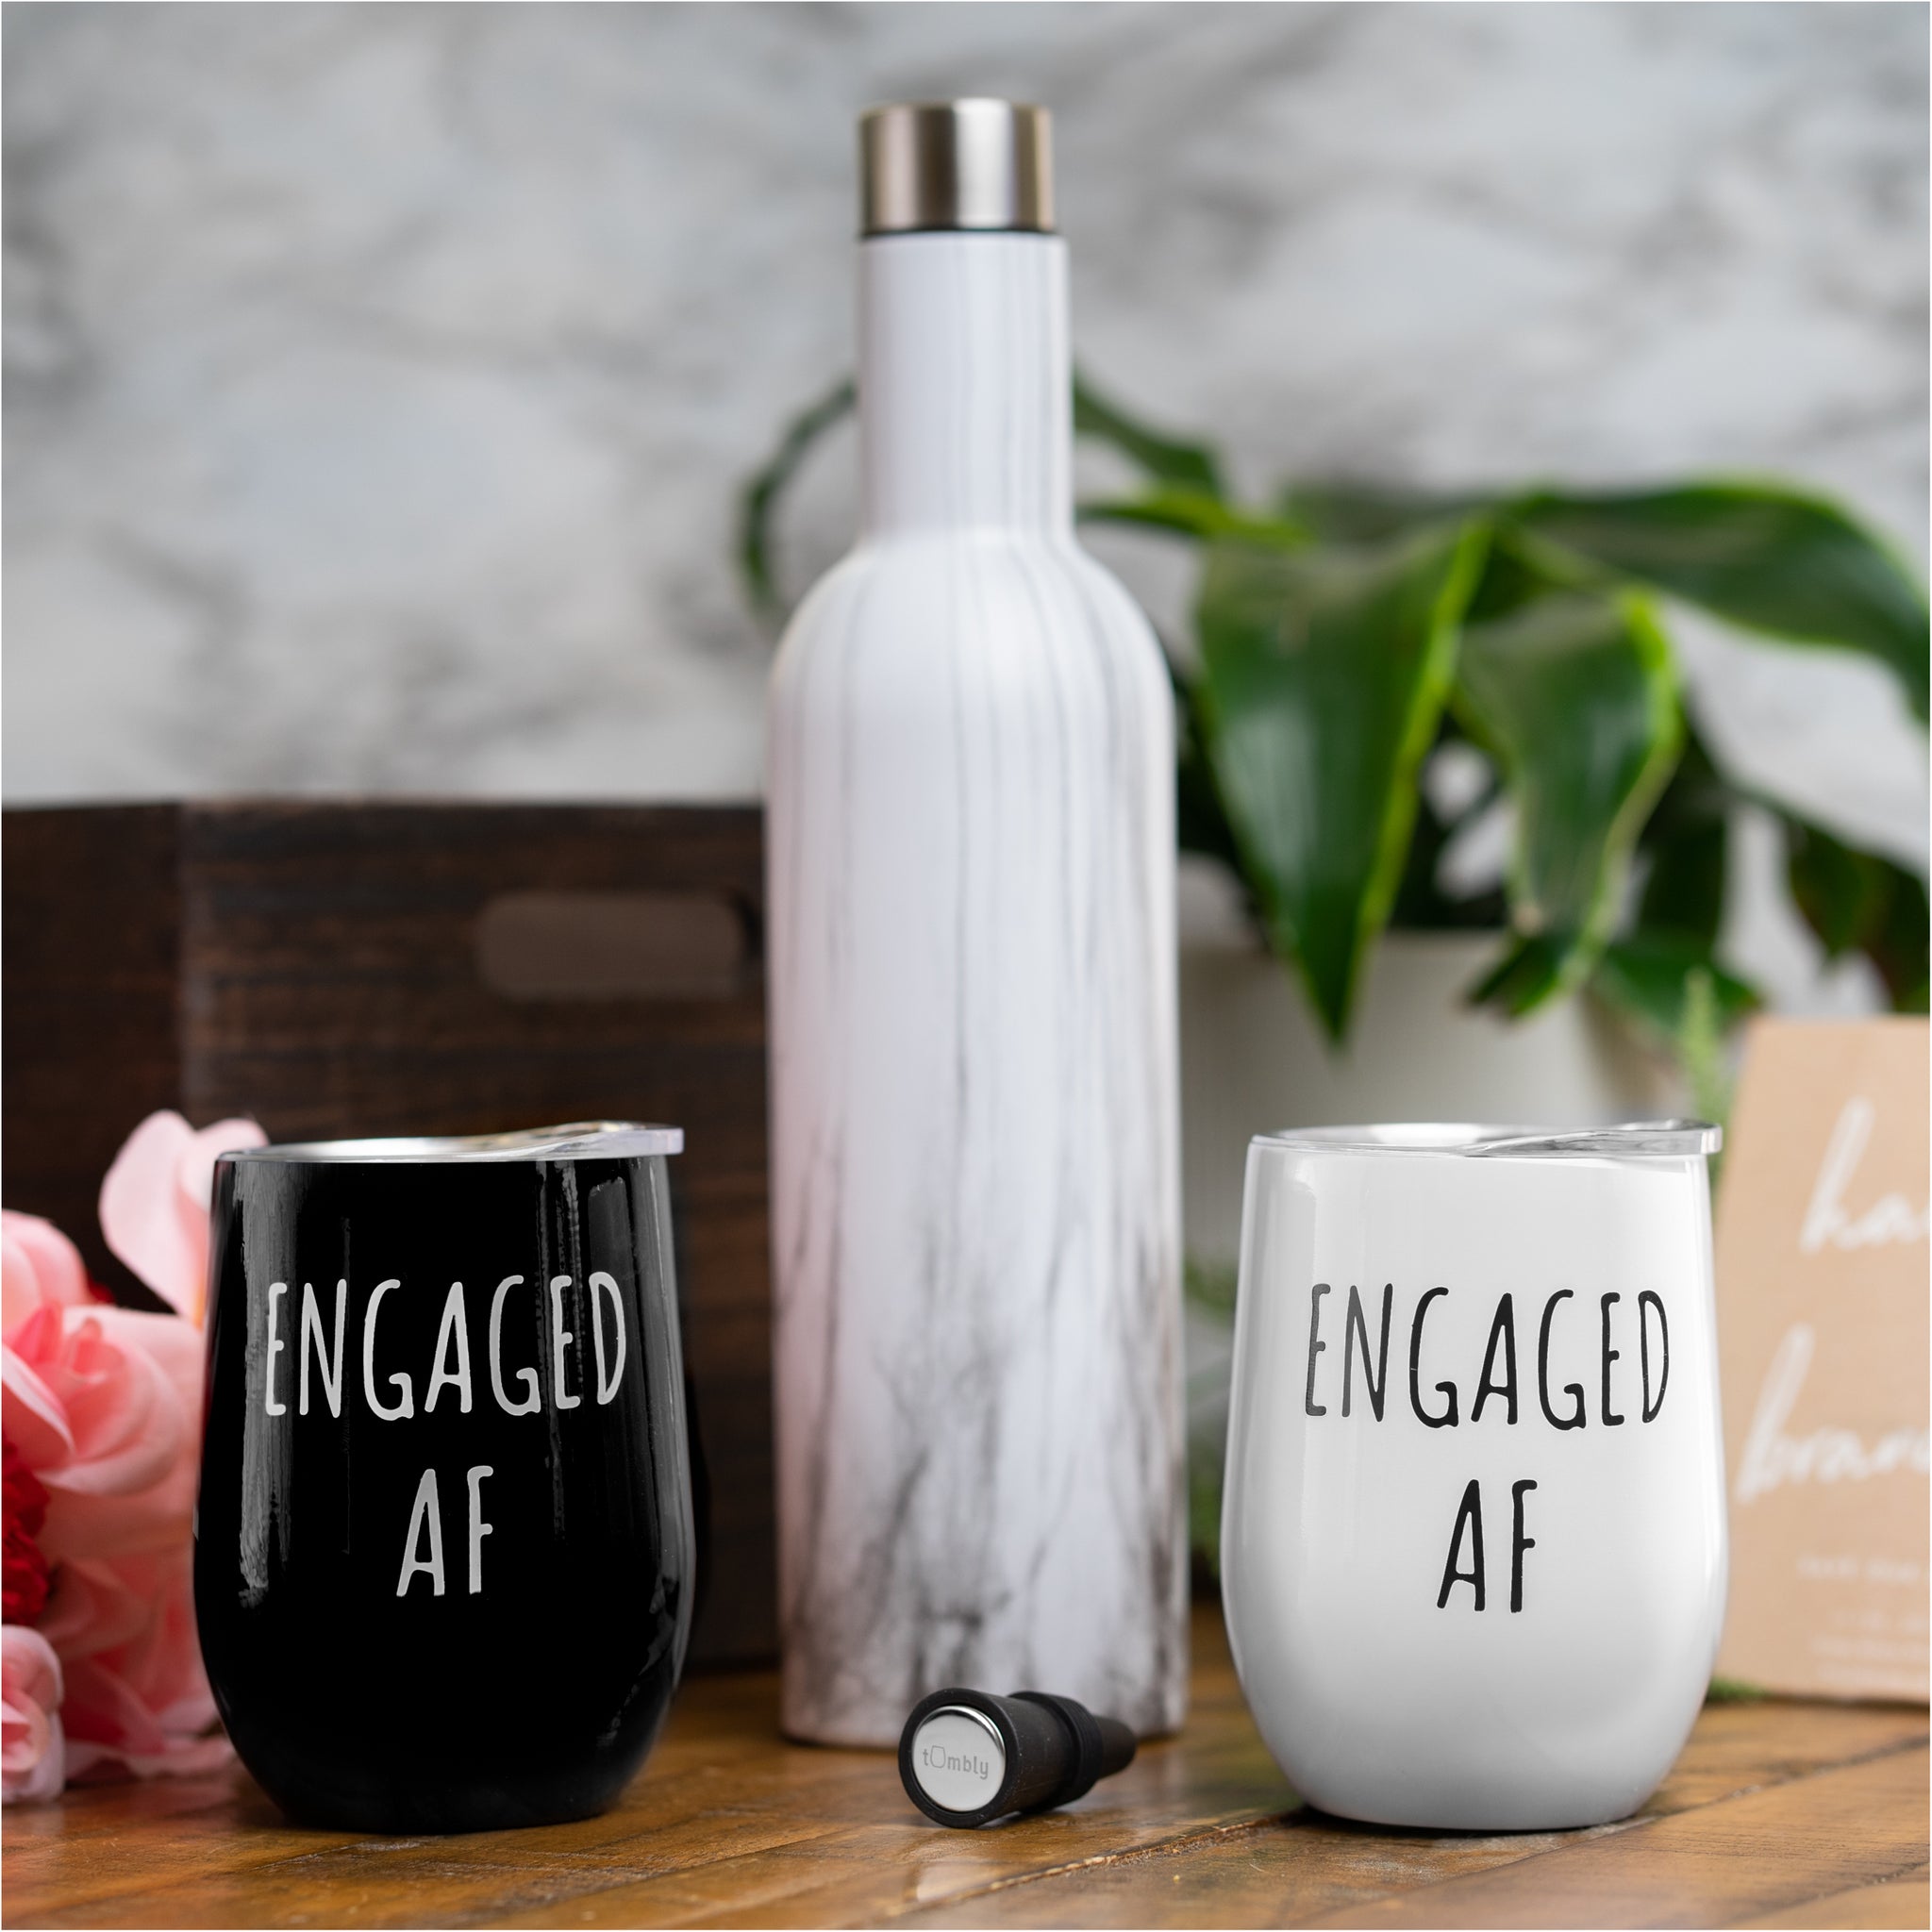 Engaged AF - Engagement Gifts for Women, Engaged Gifts for Her, Fiance –  Tumbly Gifts